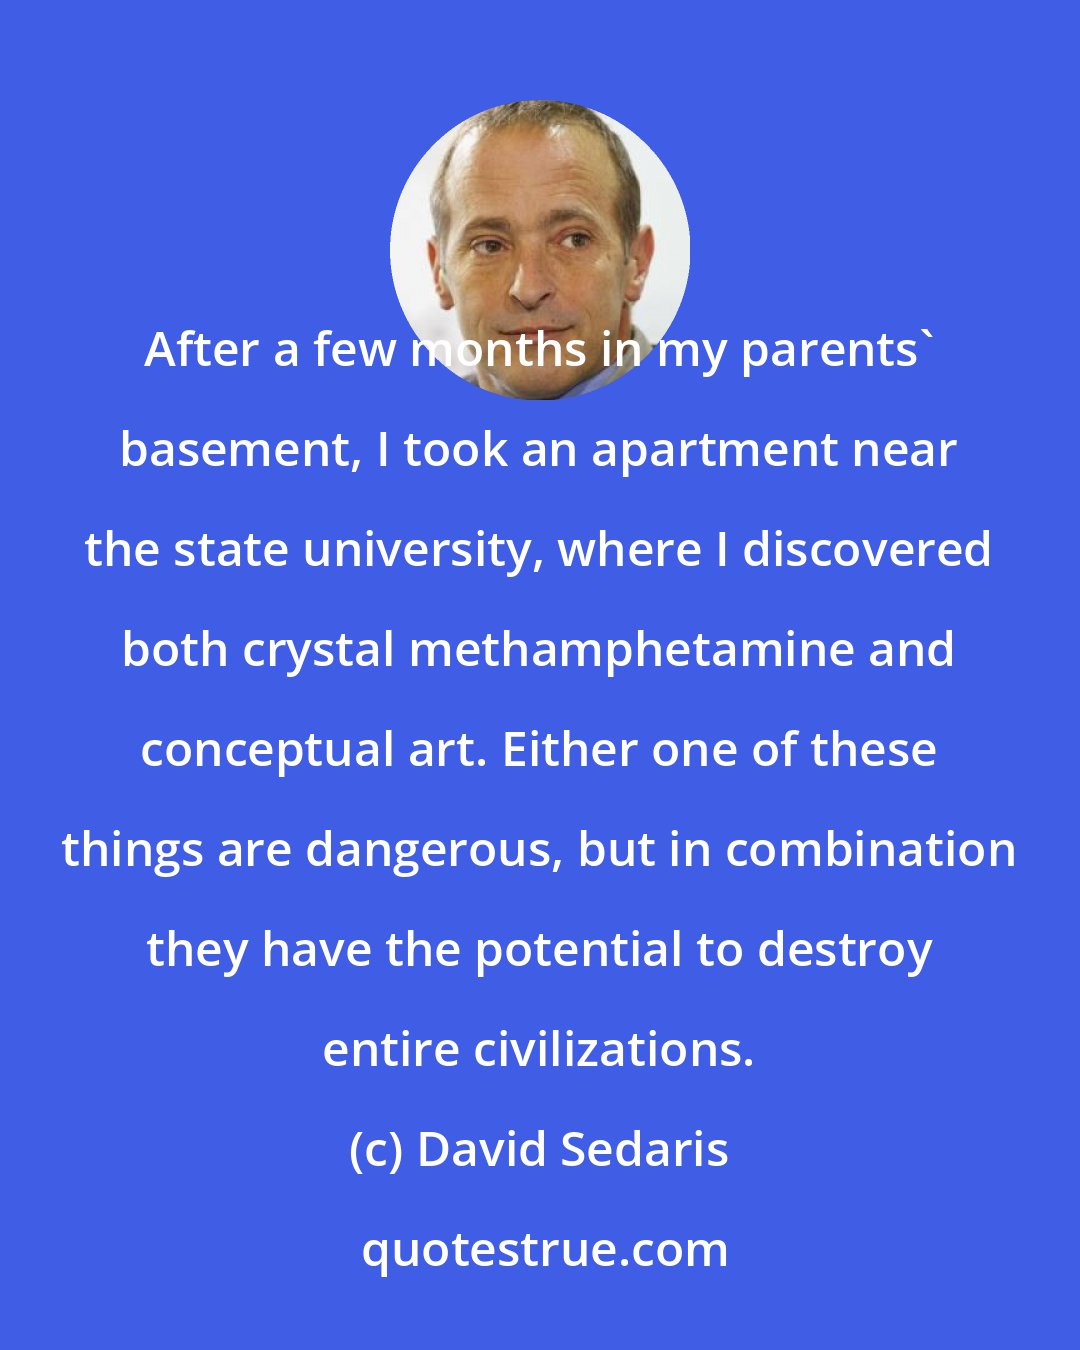 David Sedaris: After a few months in my parents' basement, I took an apartment near the state university, where I discovered both crystal methamphetamine and conceptual art. Either one of these things are dangerous, but in combination they have the potential to destroy entire civilizations.